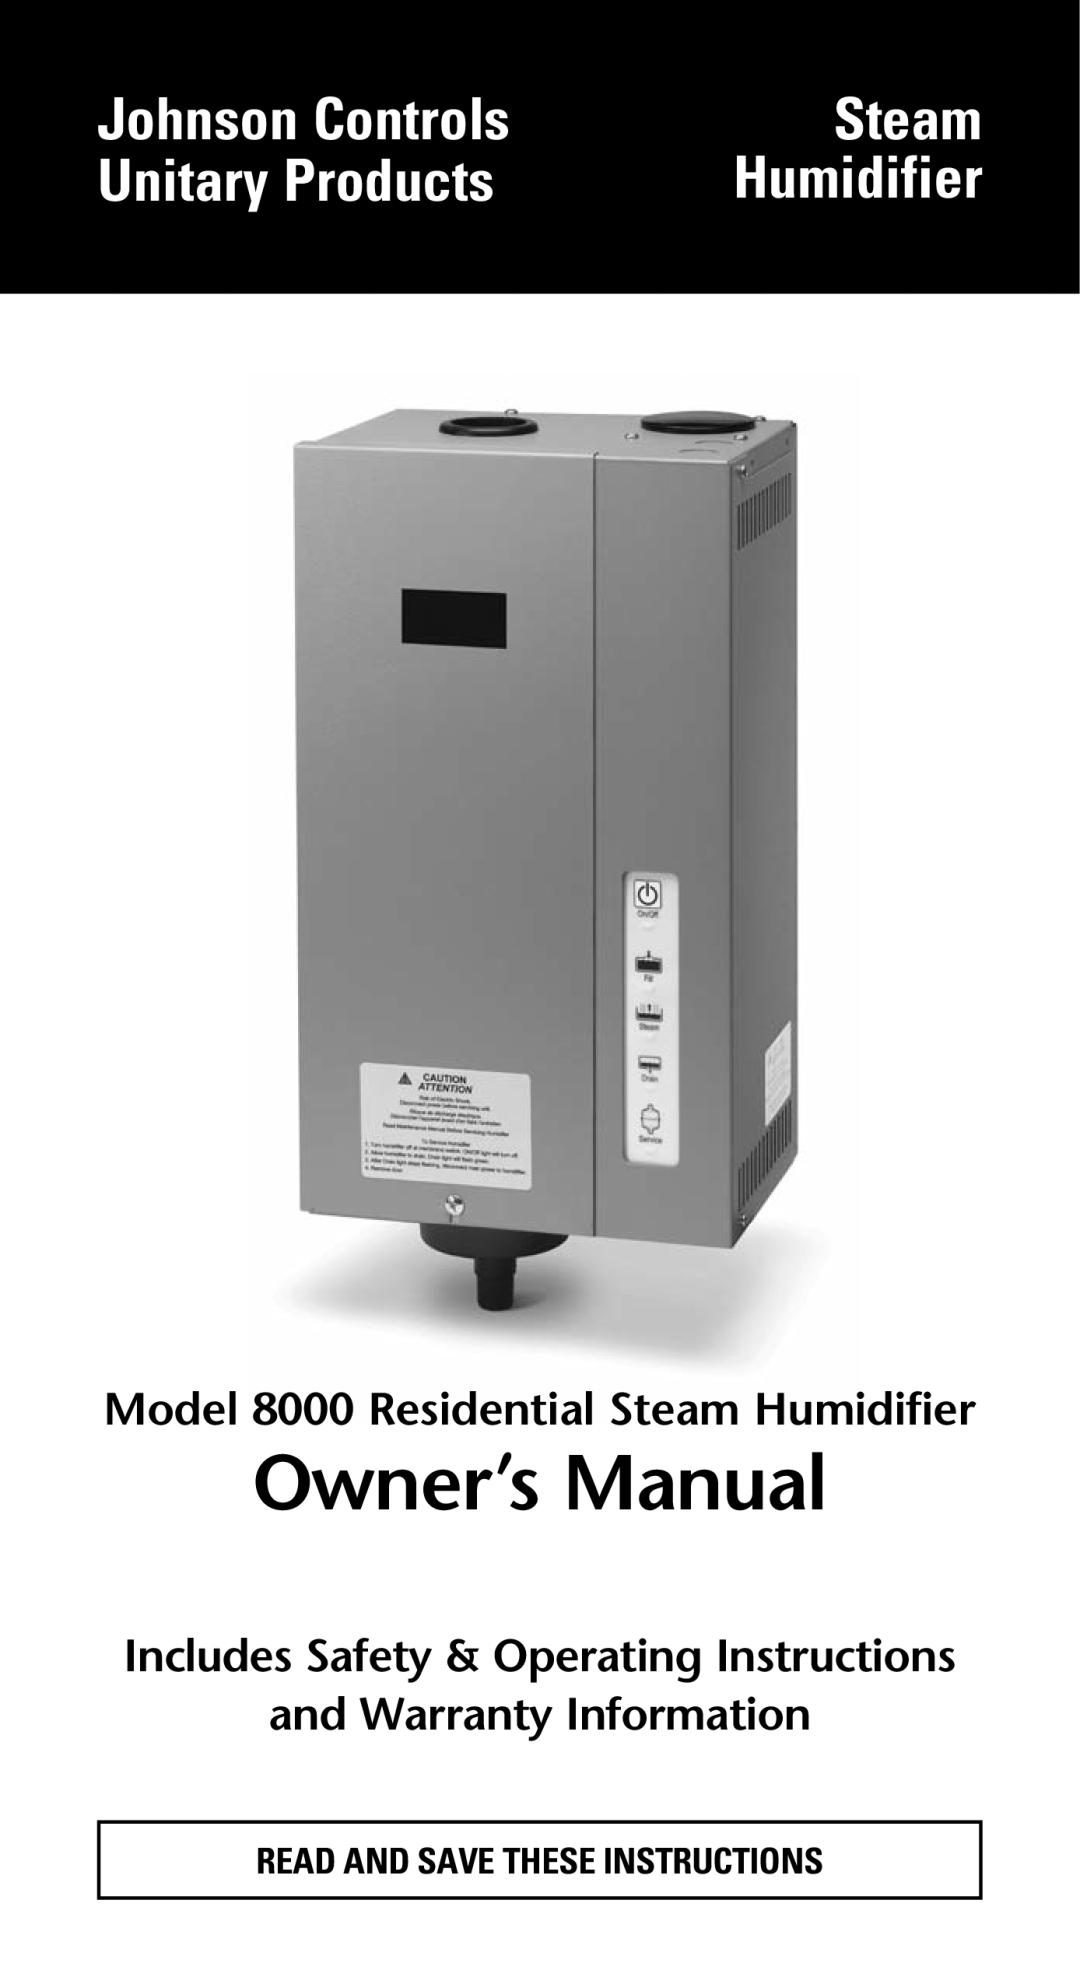 Johnson Controls 8000 owner manual Johnson Controls, Steam, Unitary Products, Humidifier, and Warranty Information 